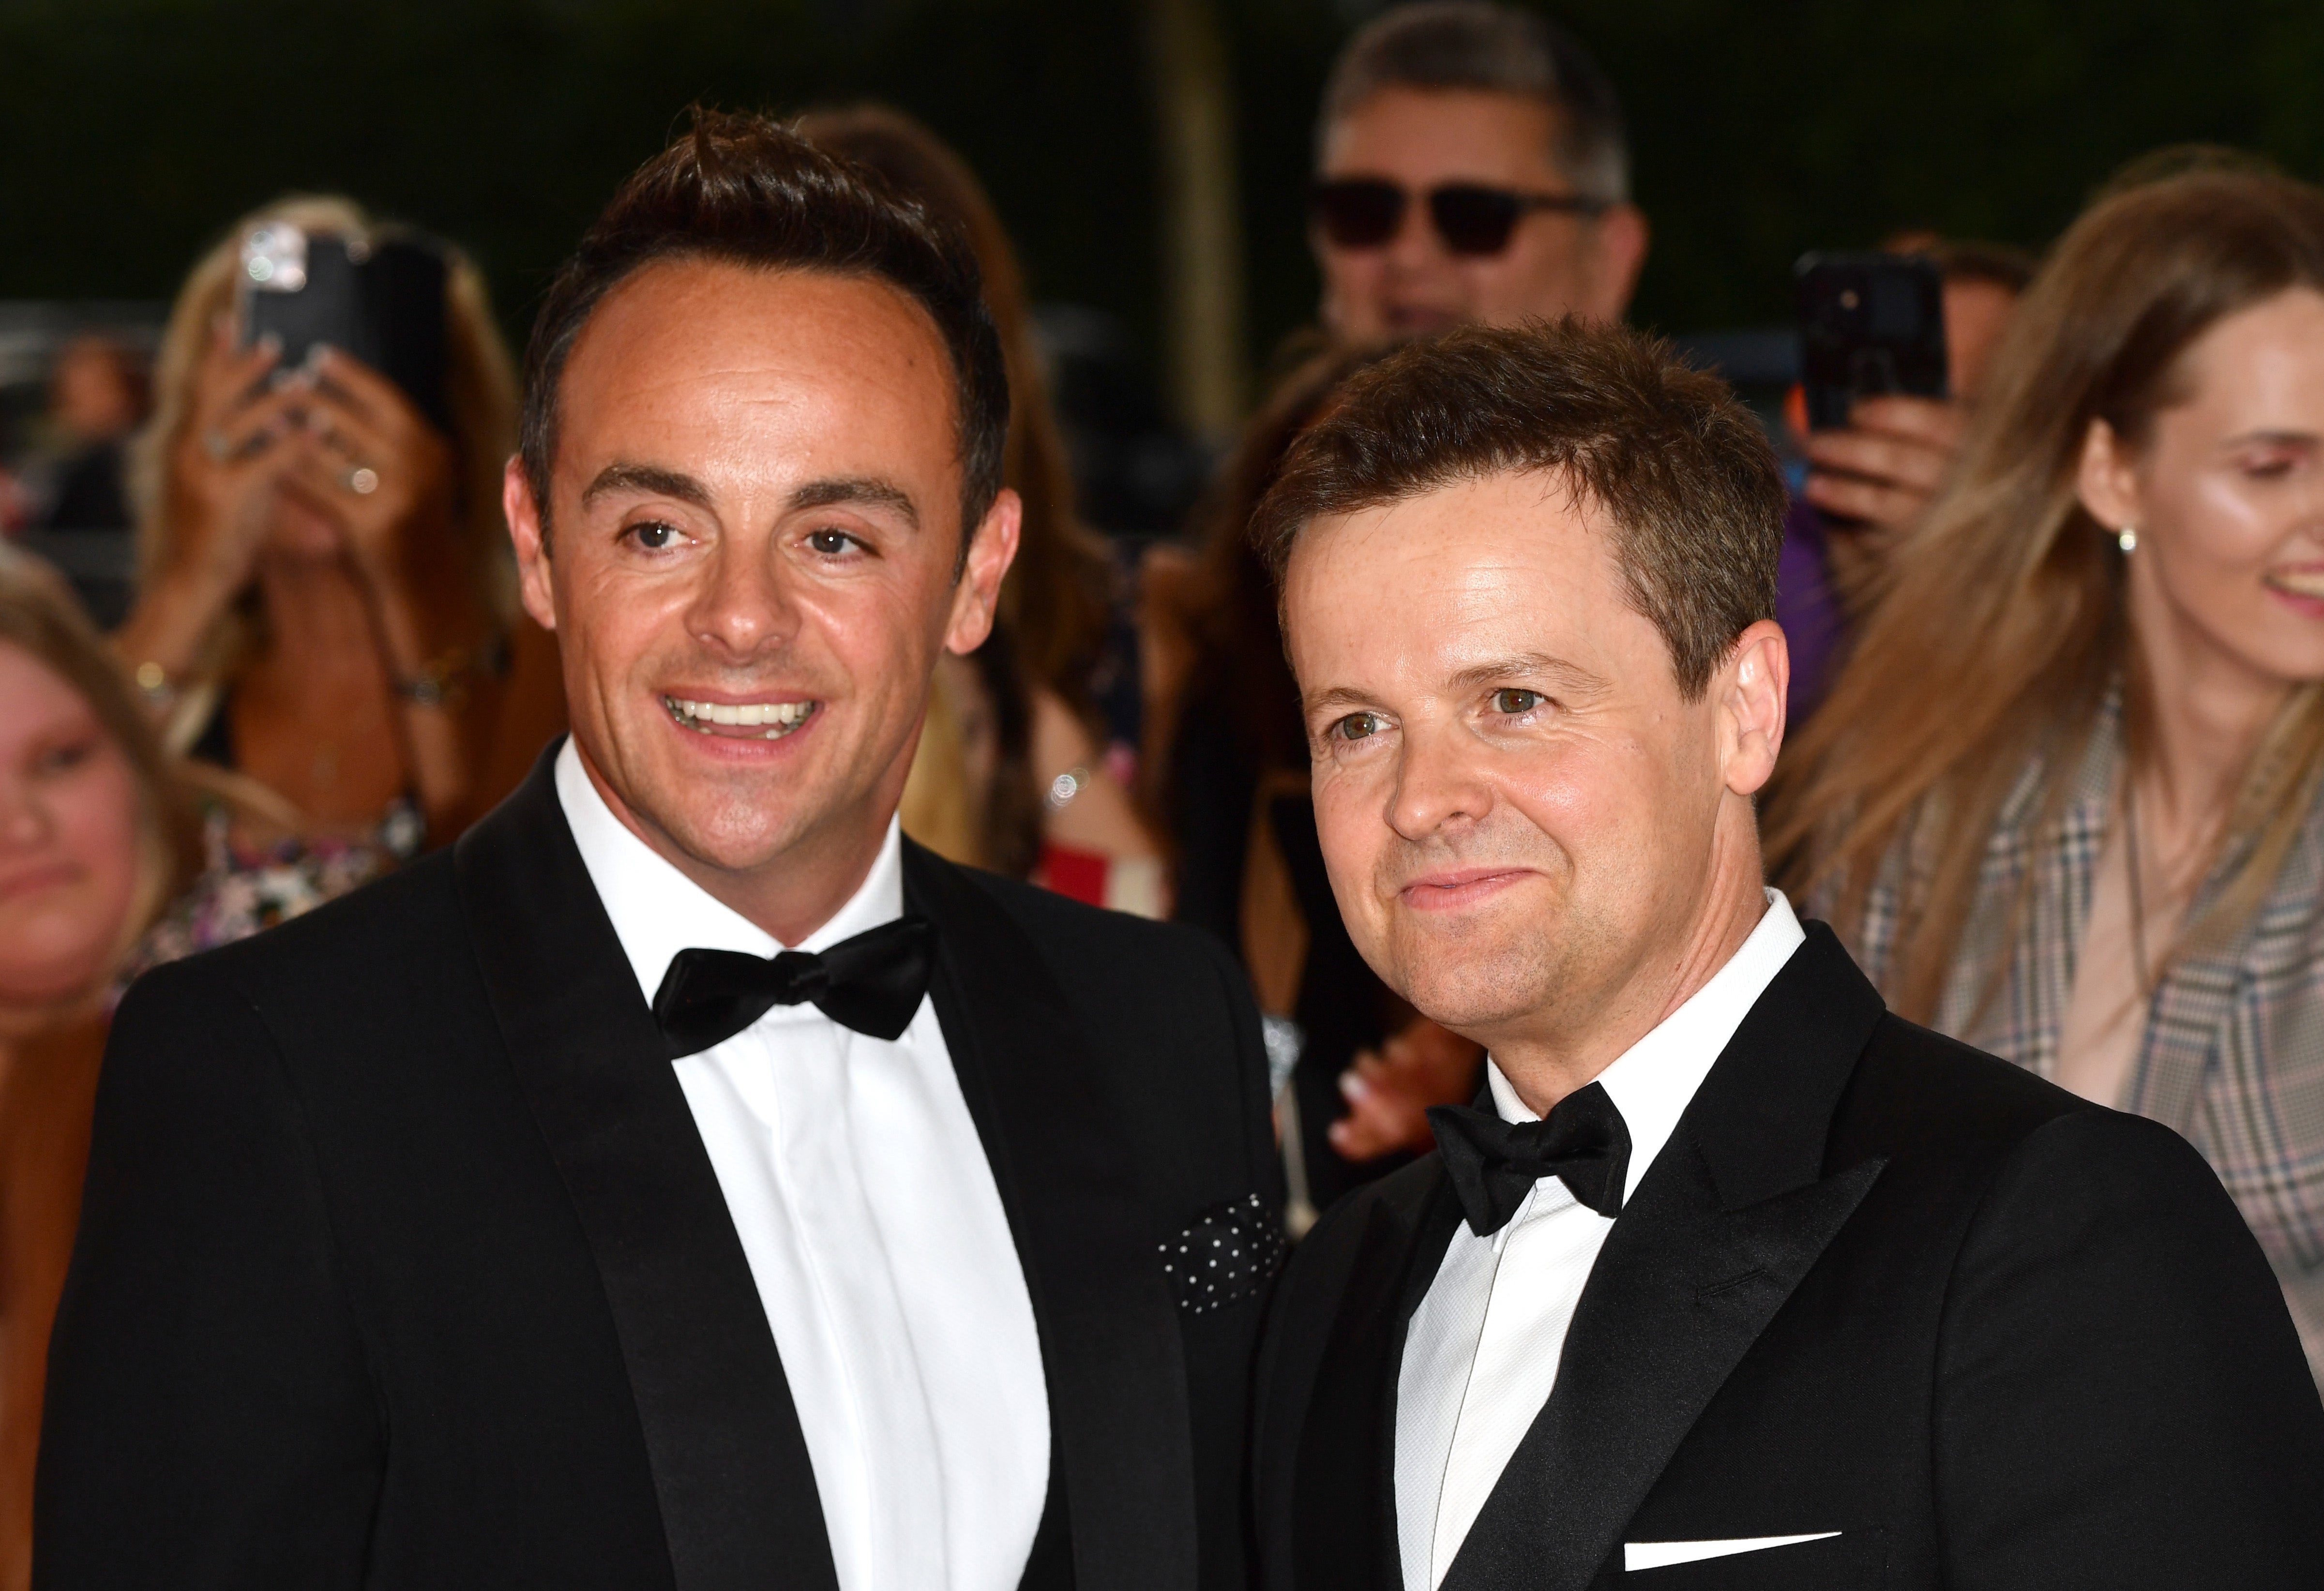 Ubiquitous presenting duo Ant and Dec are being paid around £2m to advertise banking giant Santander